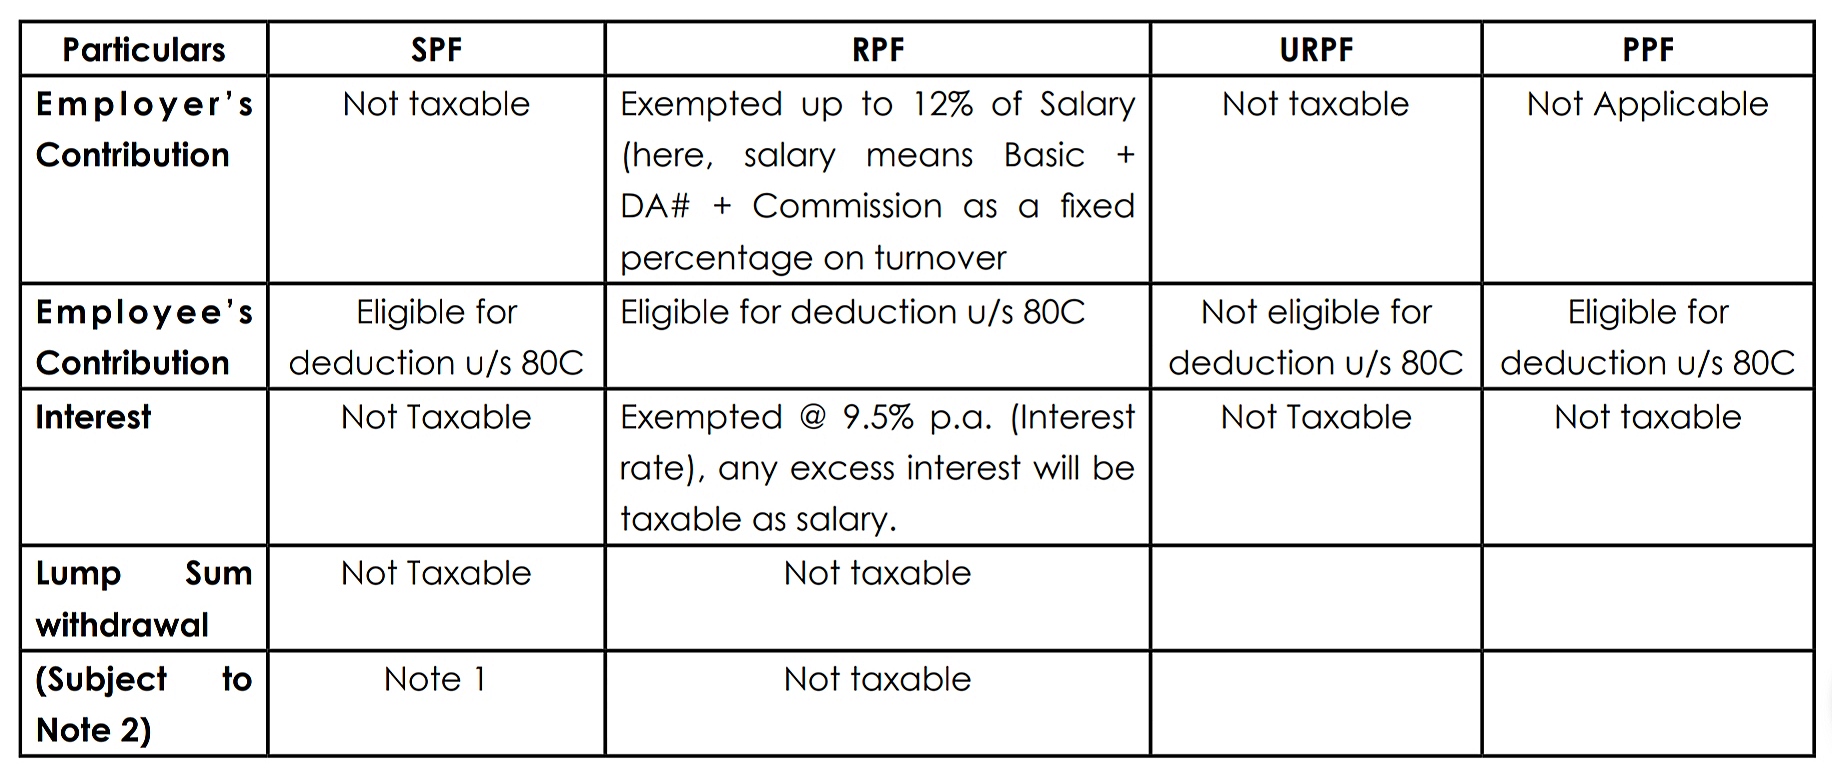 provident-fund-tax-treatment-of-provident-fund-for-salary-employee